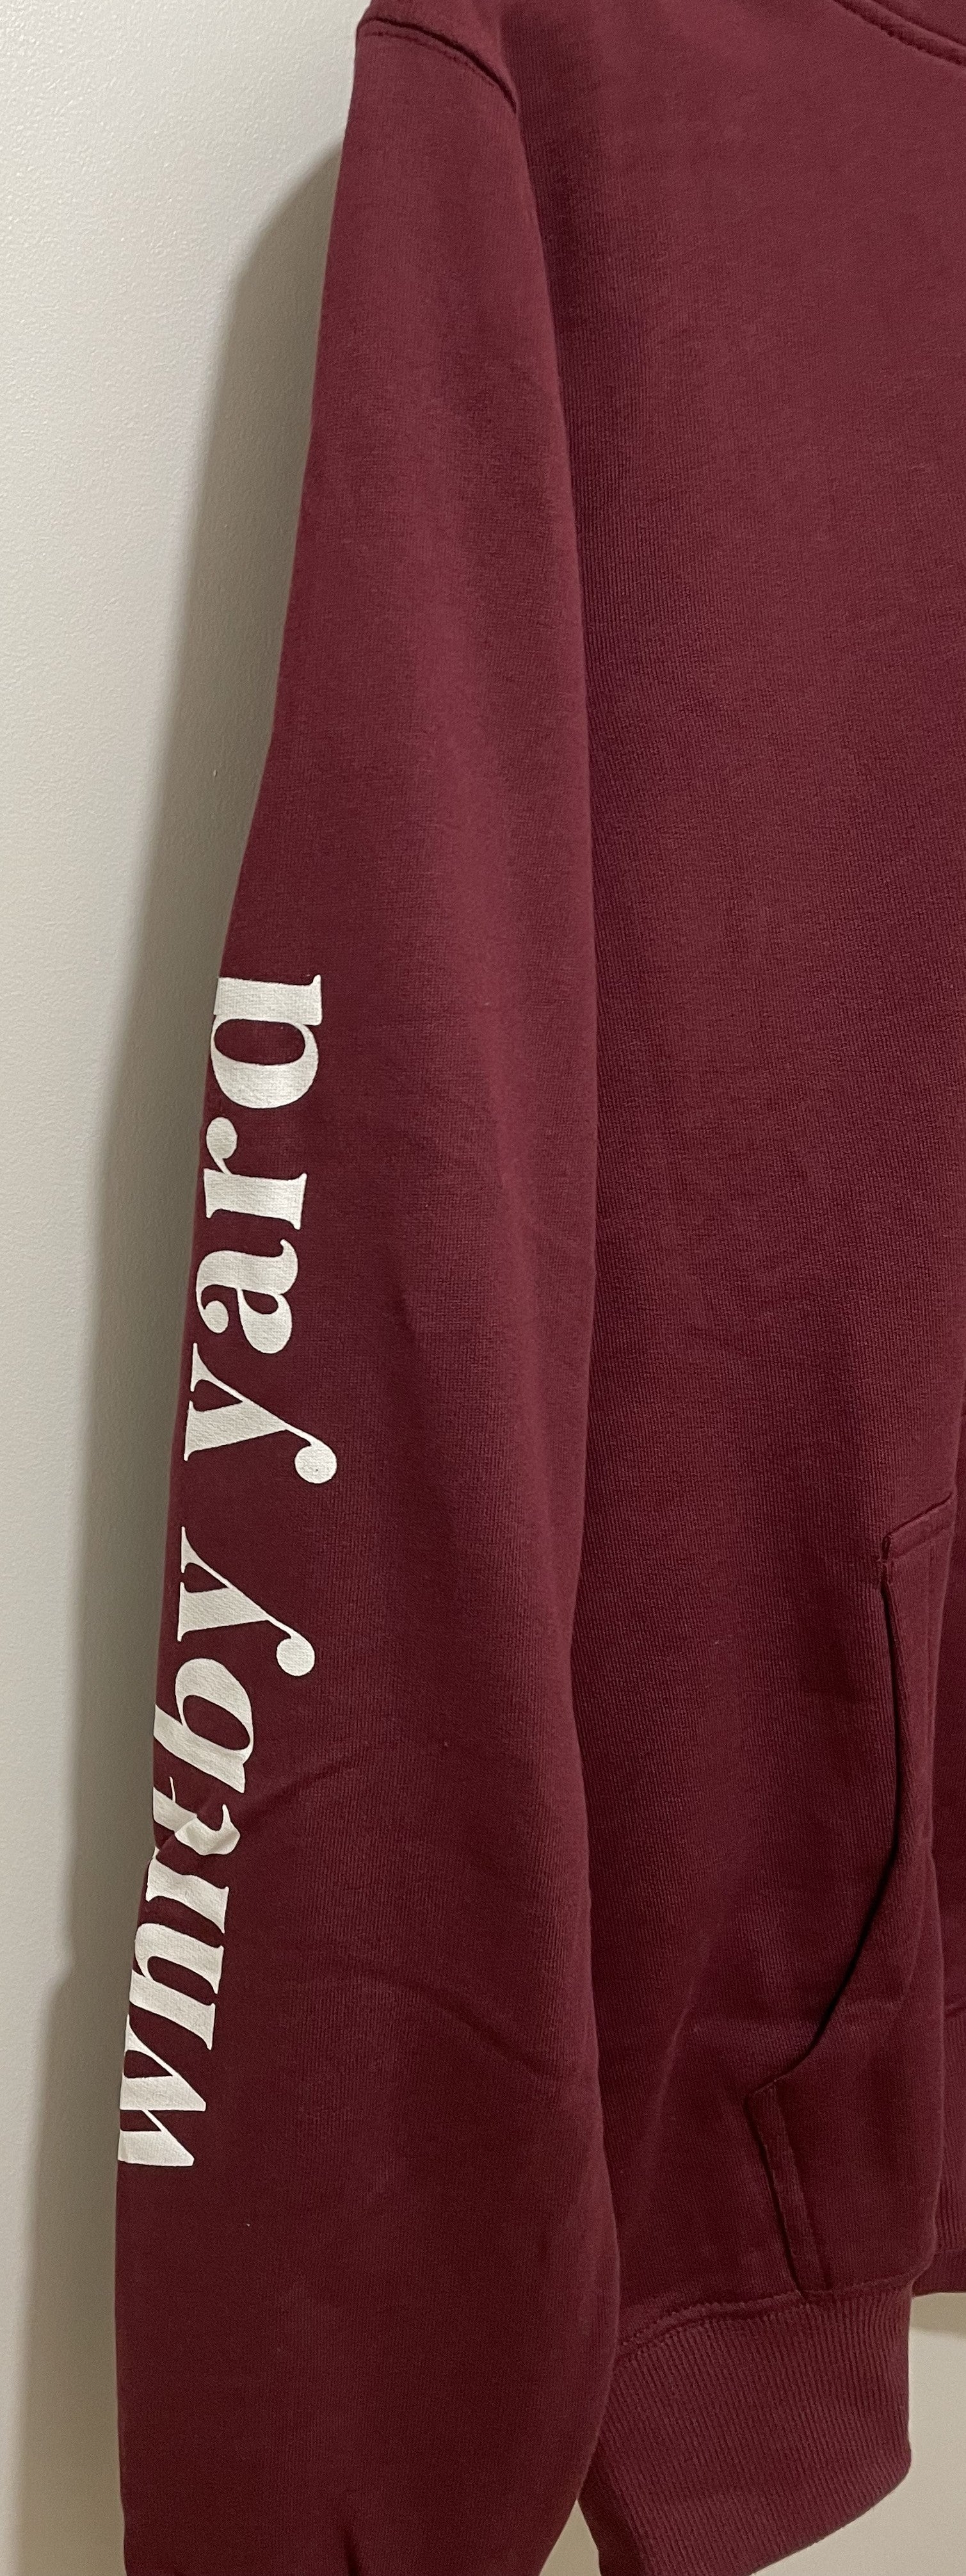 Unisex Pullover Hoodie in Burgundy with 'Whitby Yard' Text